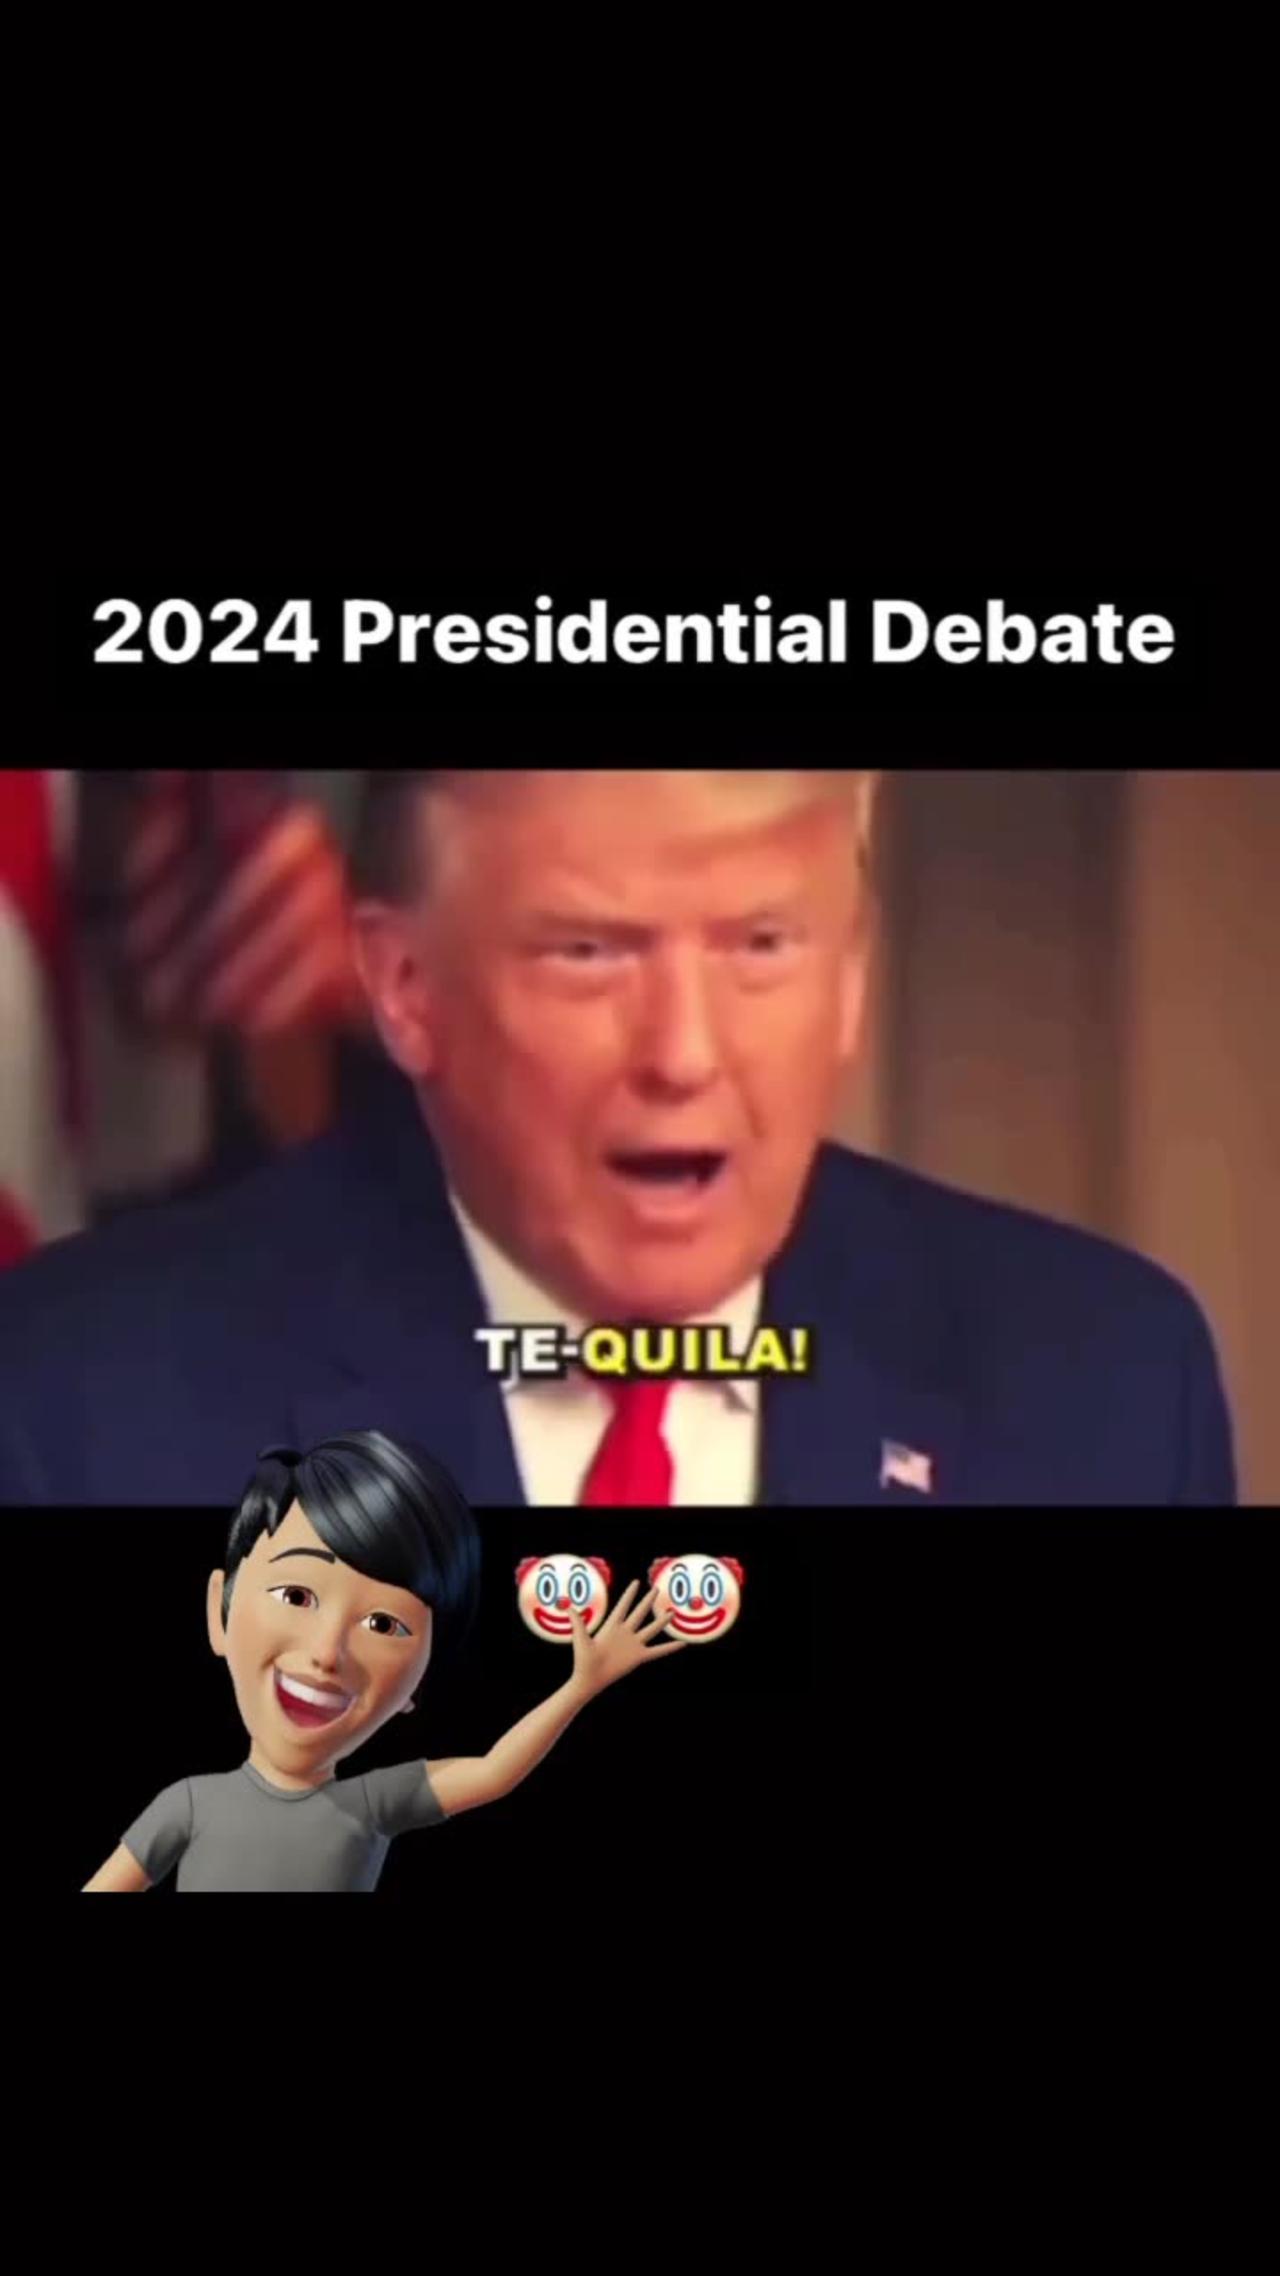 2024 Presidential "try not to laugh" edition